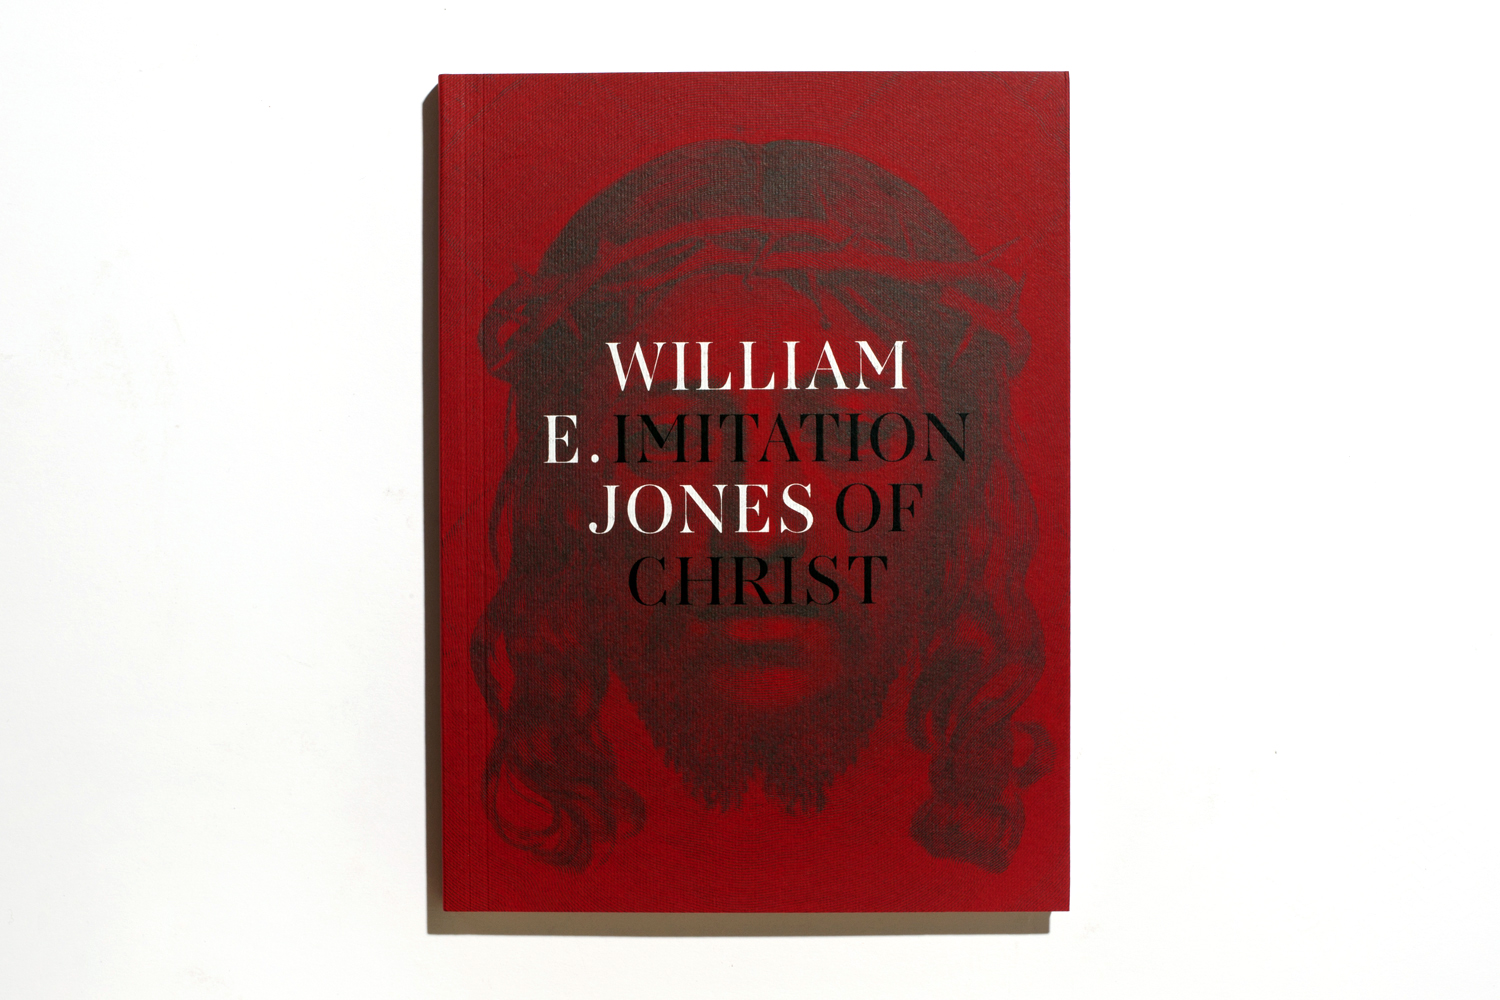 Imitation of Christ by William E. Jones, published by MACK, selected by Adam Broomberg and Oliver Chanarin, artists and bookmakers.